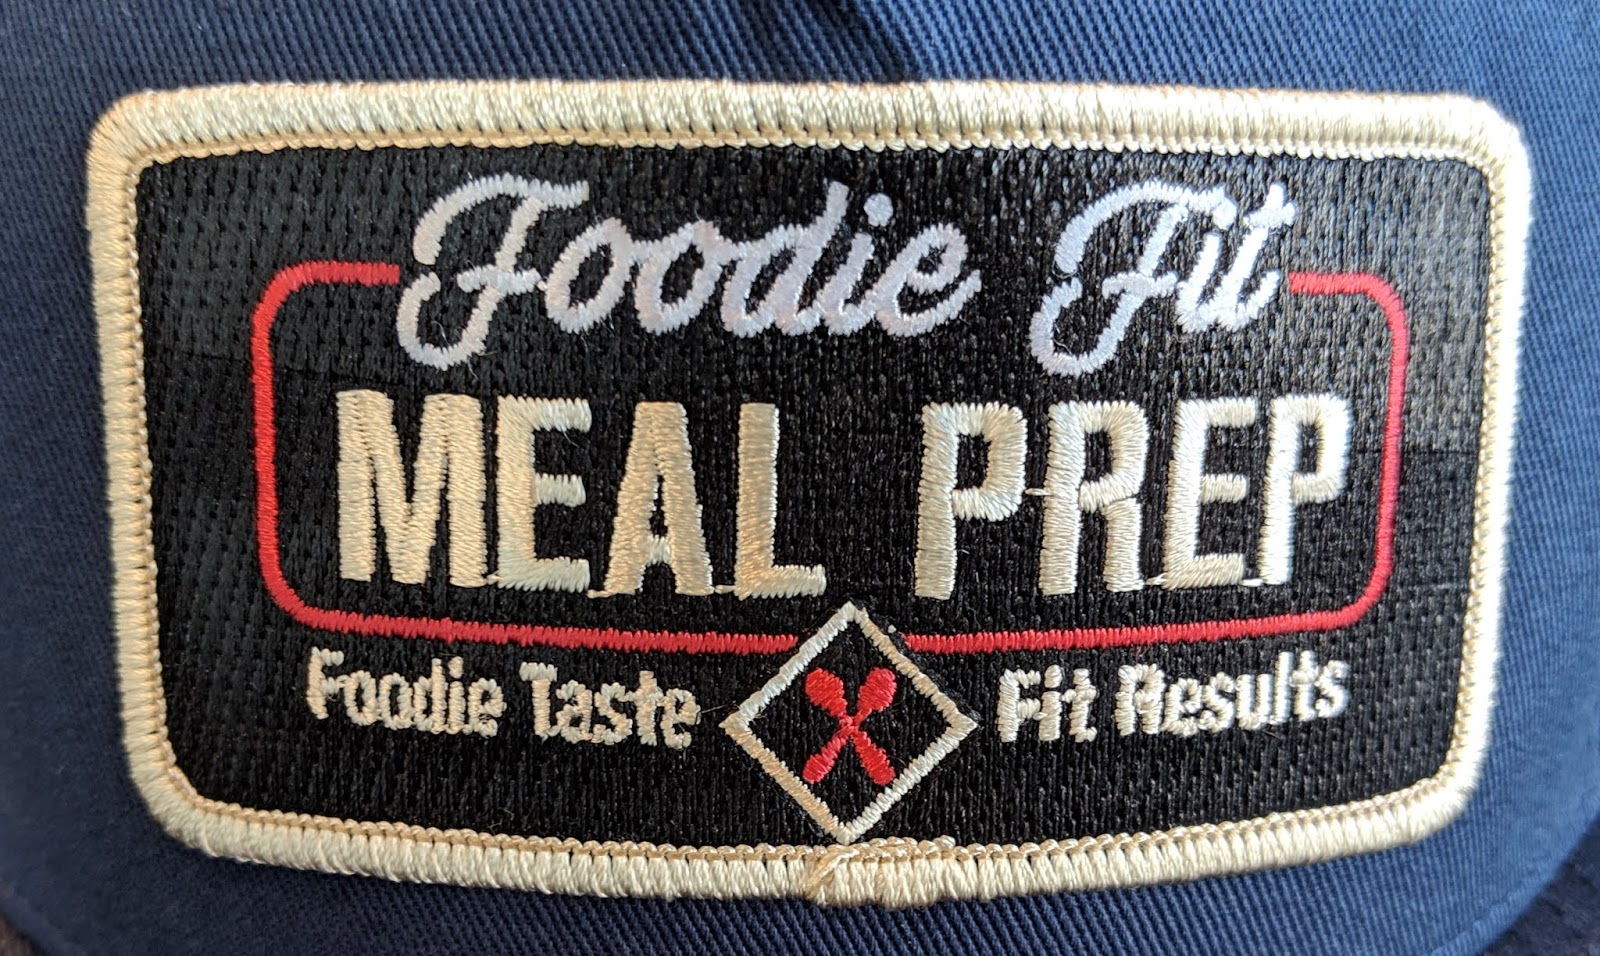 foodie fit to size